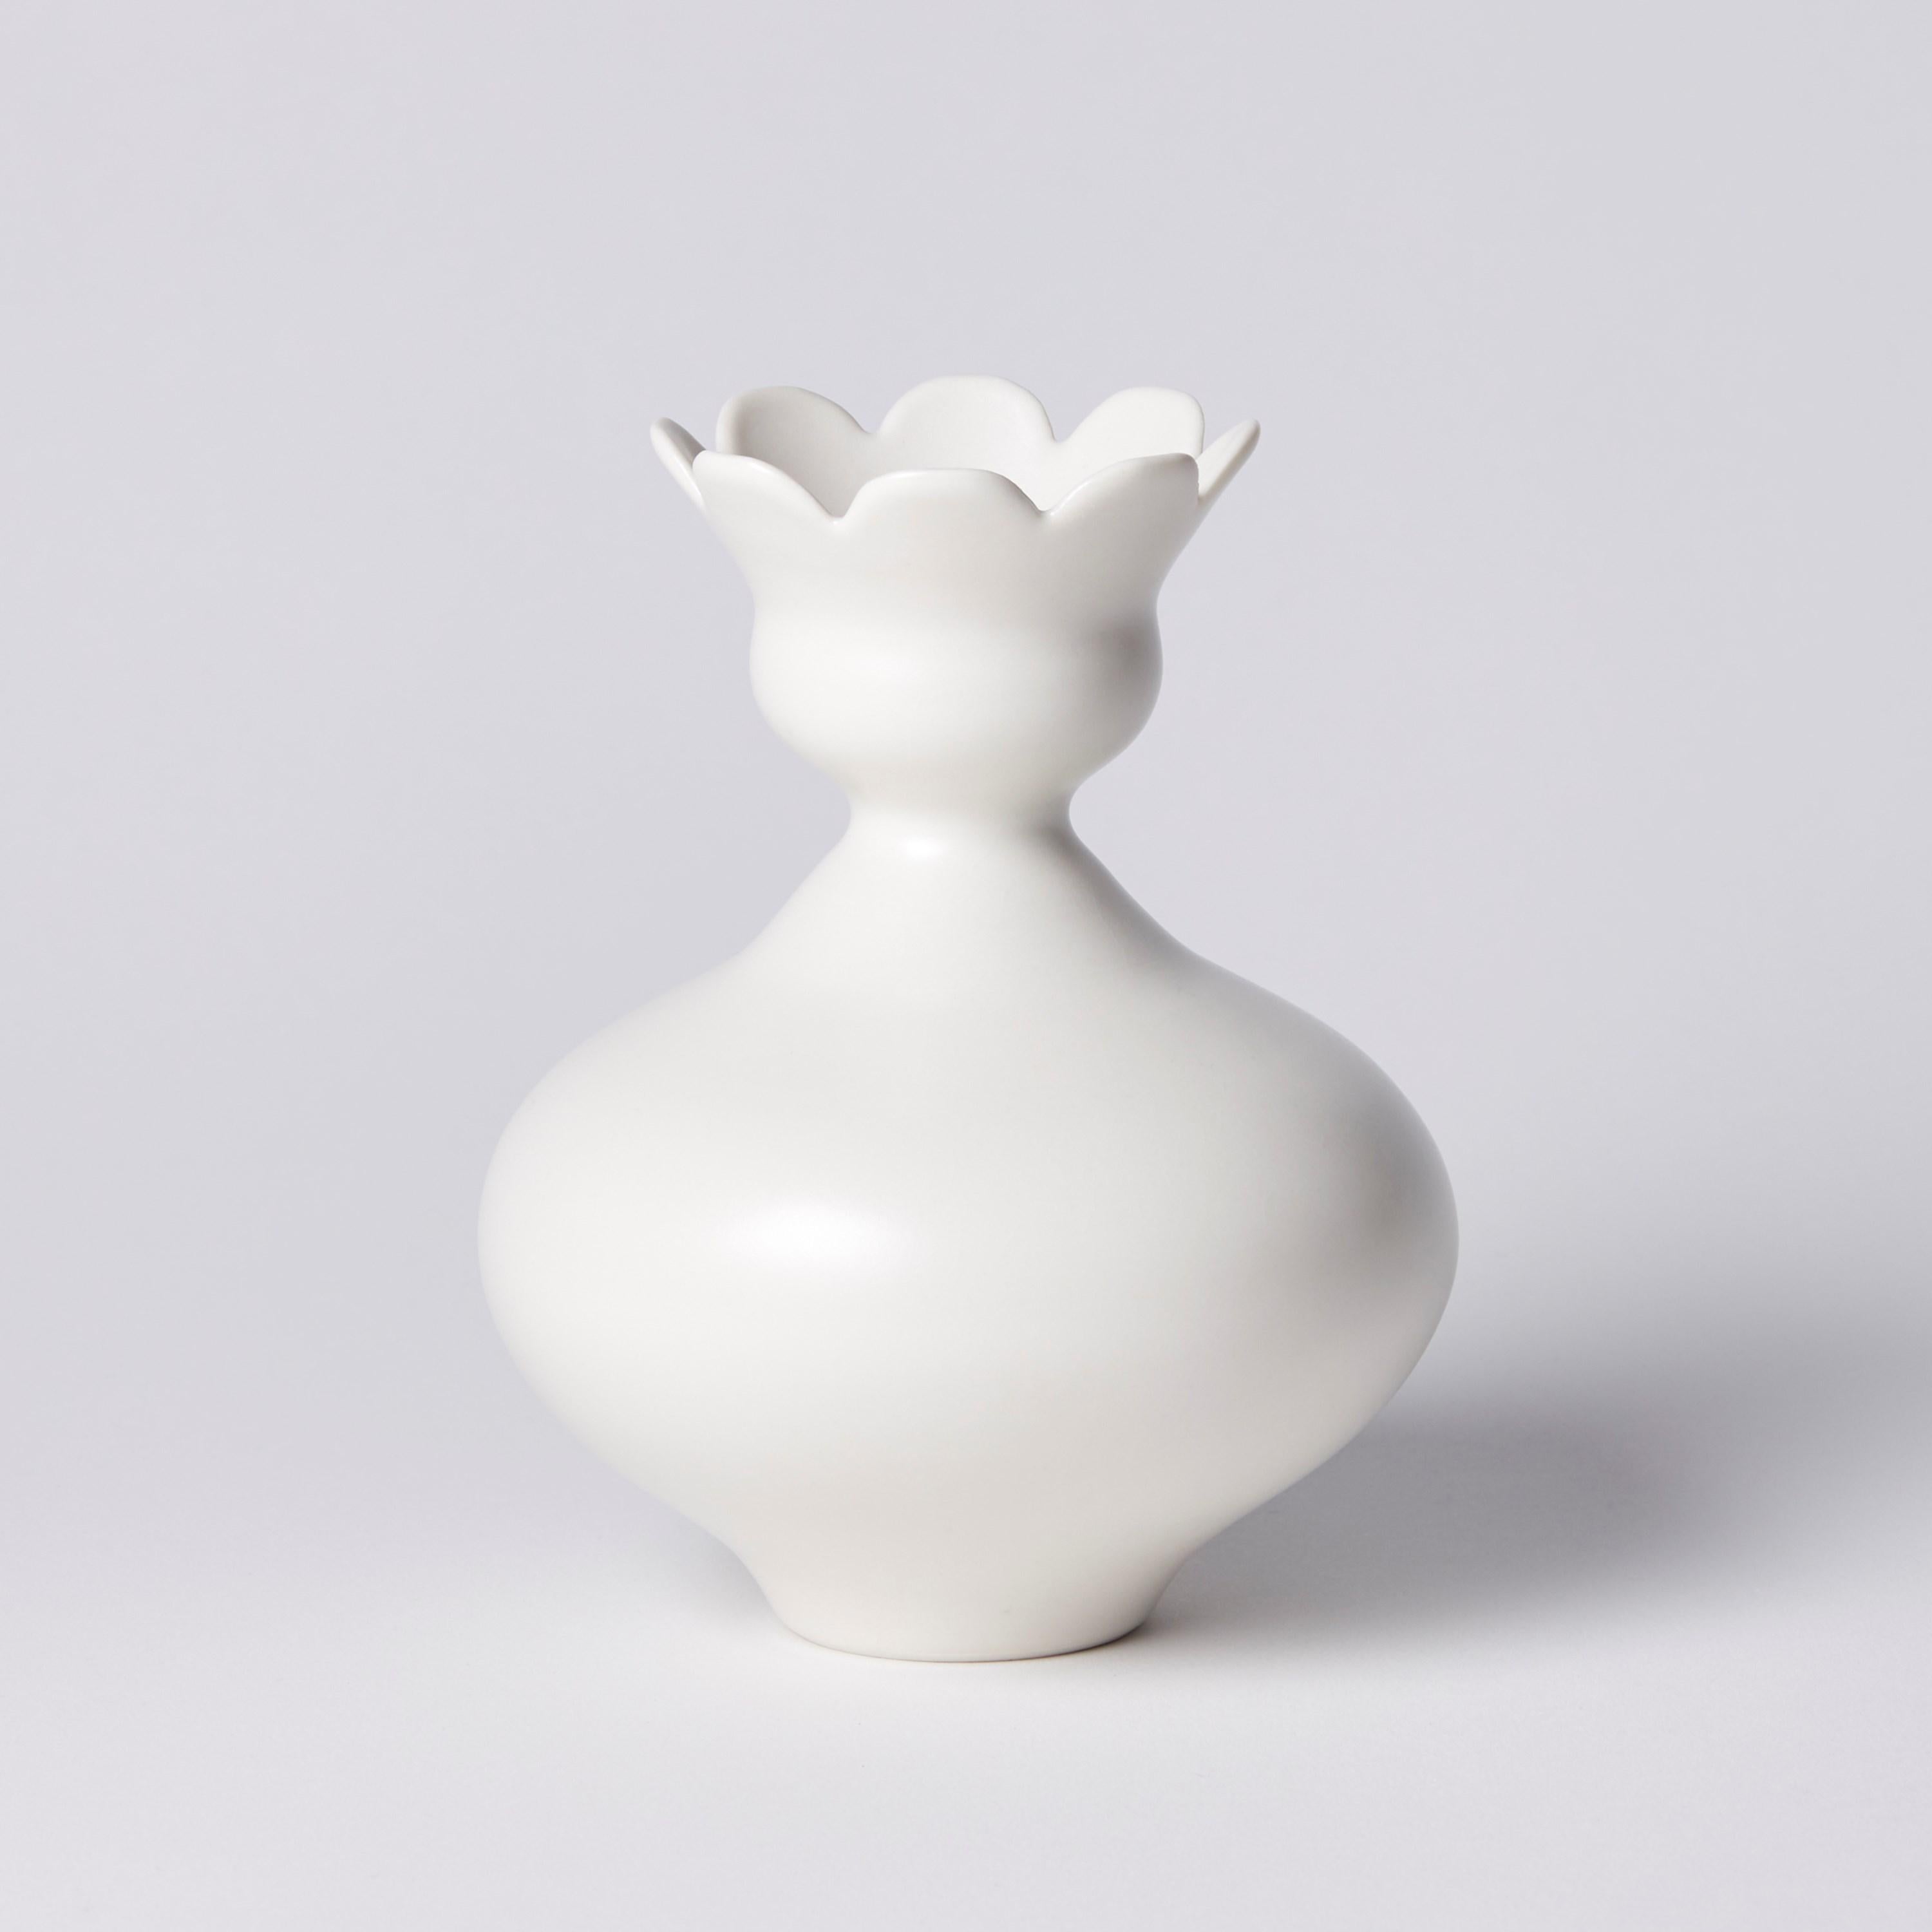 ‘Vase with Daisy Rim' is a unique porcelain sculptural vessel by the British artist, Vivienne Foley.  

Vivienne Foley is based in Gloucestershire where she produces exquisite ceramic sculpture. Although in essence they are often functional pieces